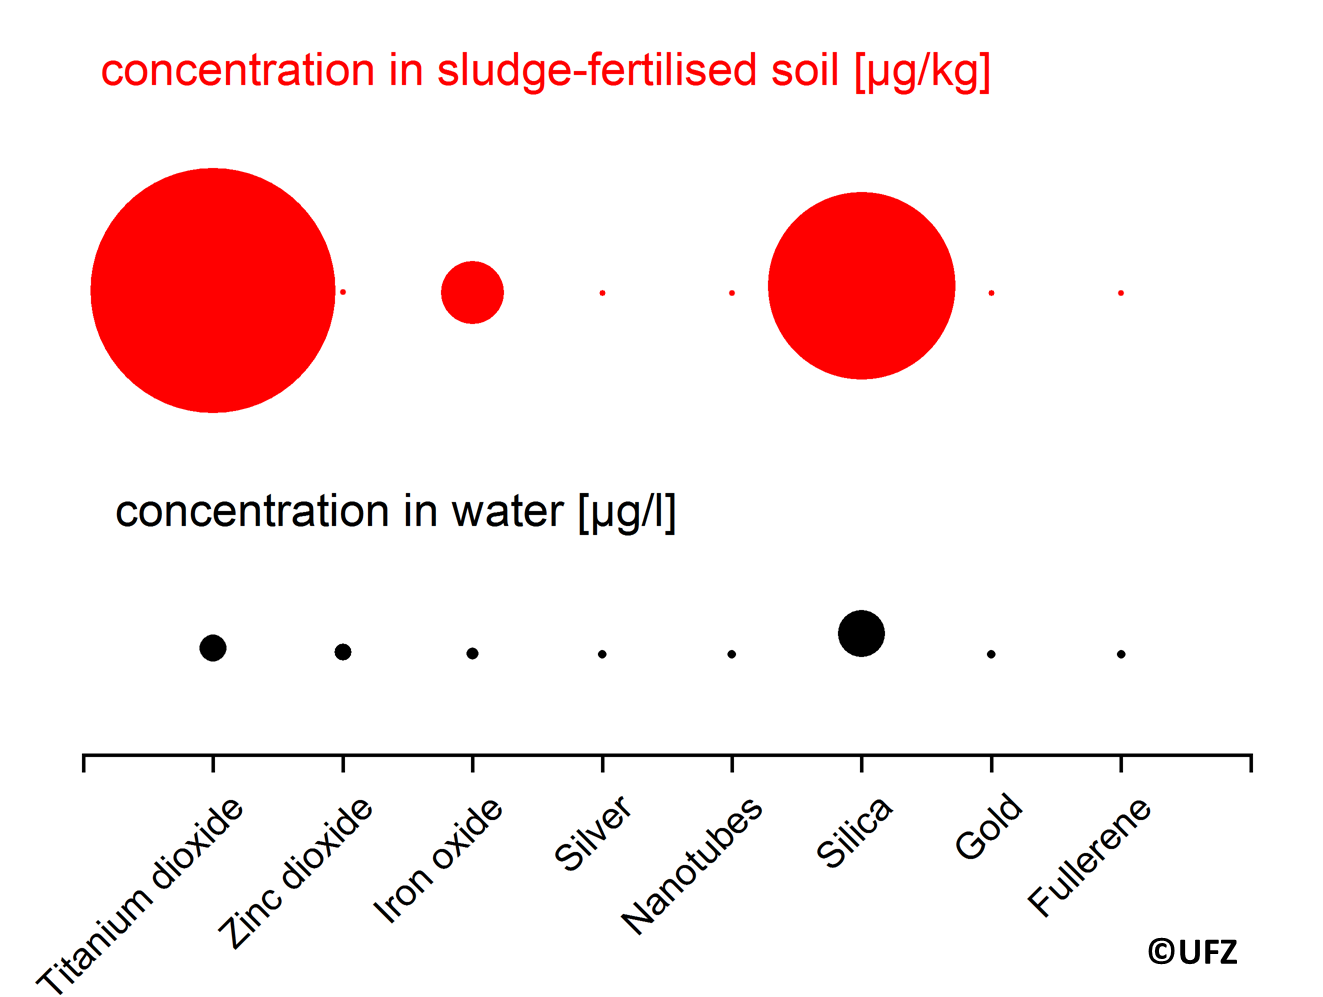 Predicted environmental concentrations of nanomaterials in surface waters and sludge-treated soils. Mostly, higher concentrations of nanomaterials are predicted in sludge-treated soils. This is due to the removal of nanomaterials in sewage treatment plant and the subsequent deposition in the sewage sludge. ©Andreas Mattern/ UFZ Leipzig